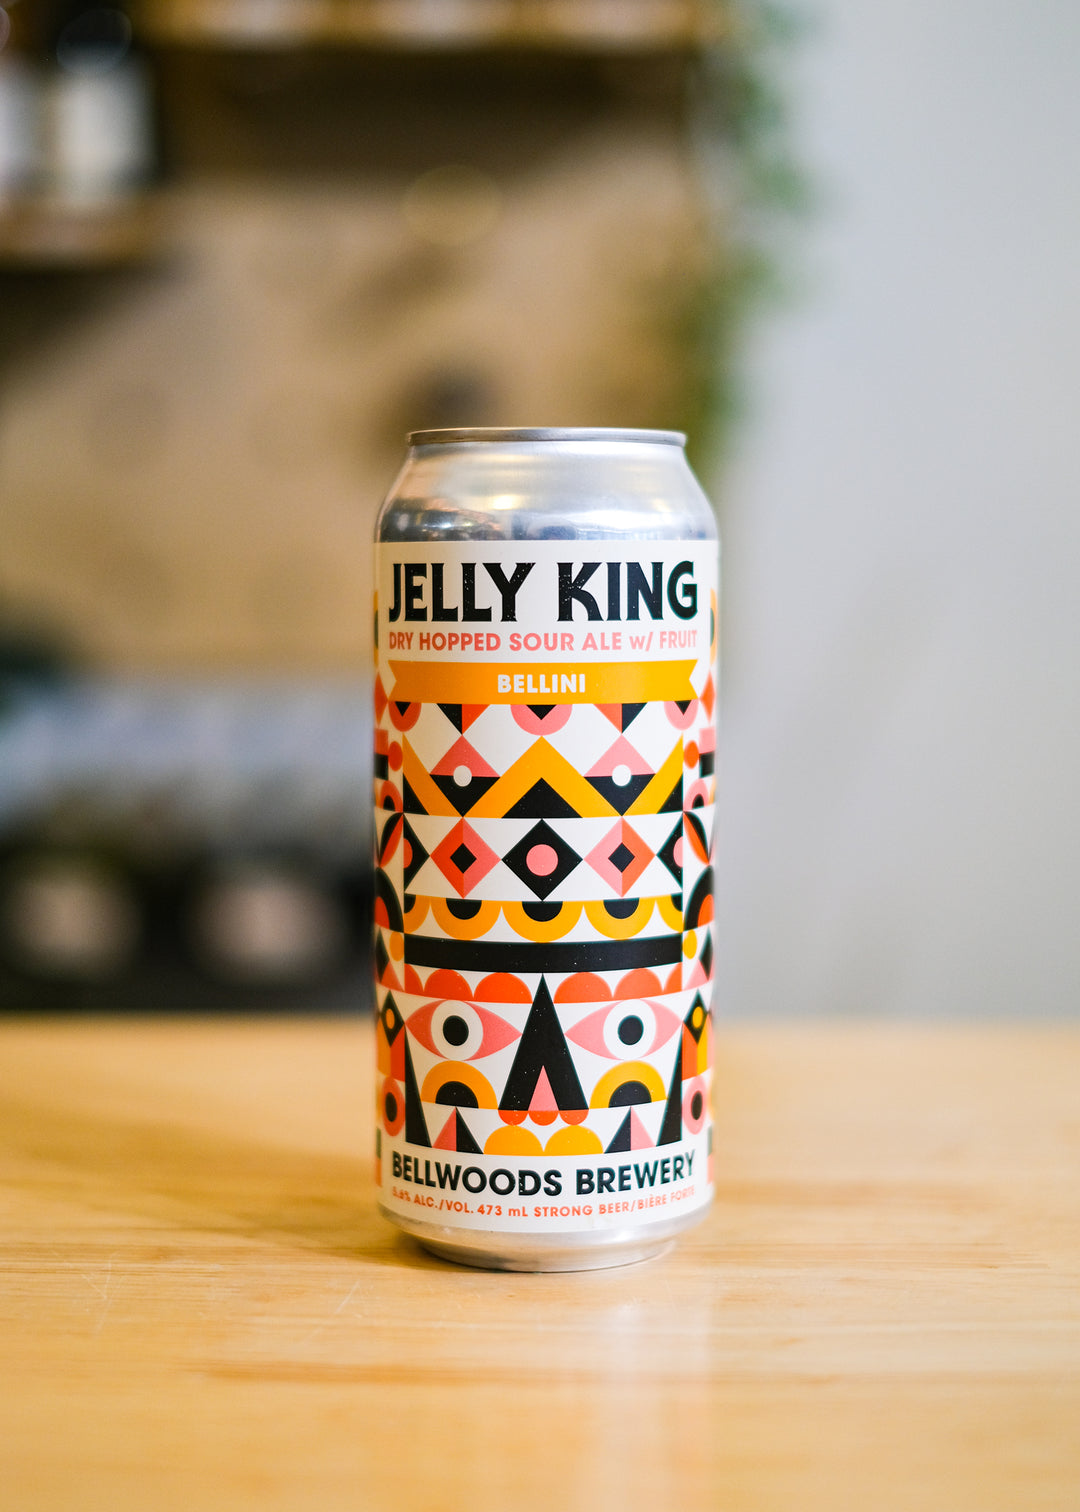 JELLY KING | Bellini Sour